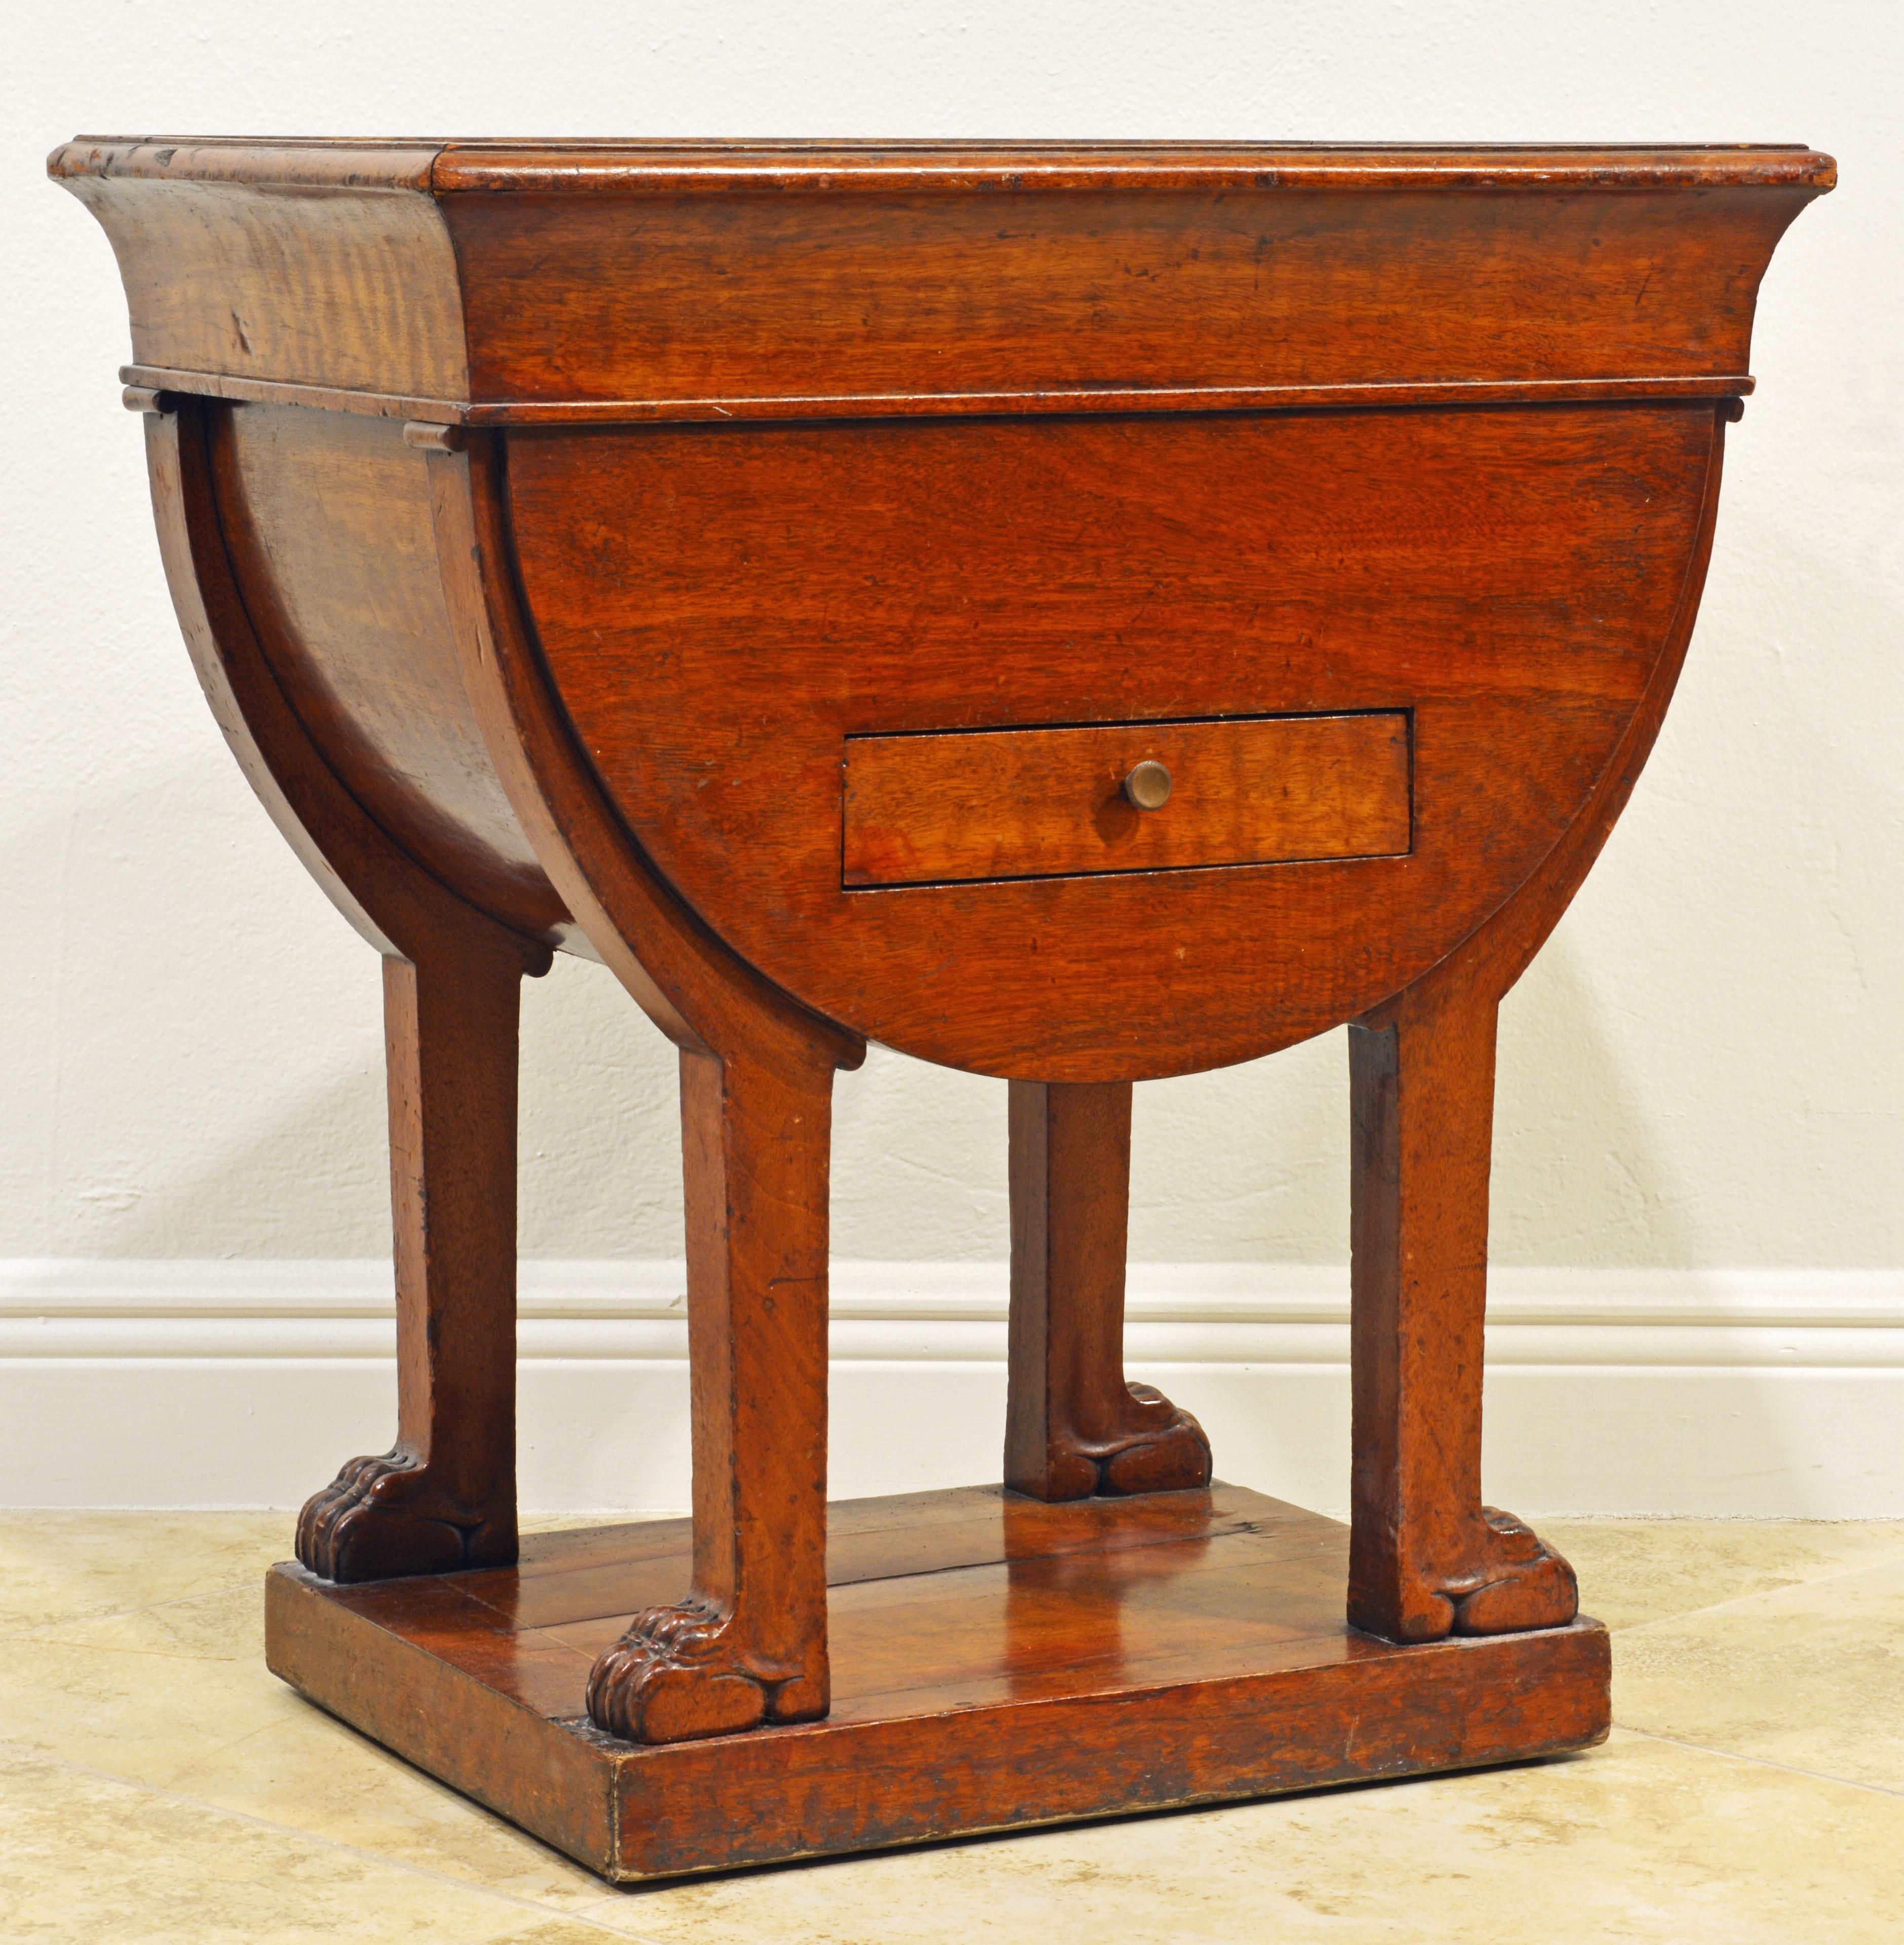 This is a rare French Empire mahogany planter fashioned in the Egyptian taste which became so popular after Napoleon I conquests in Egypt. The planter features none of the usual bronze mounts and likely dates to around 1820. It is lined with a metal